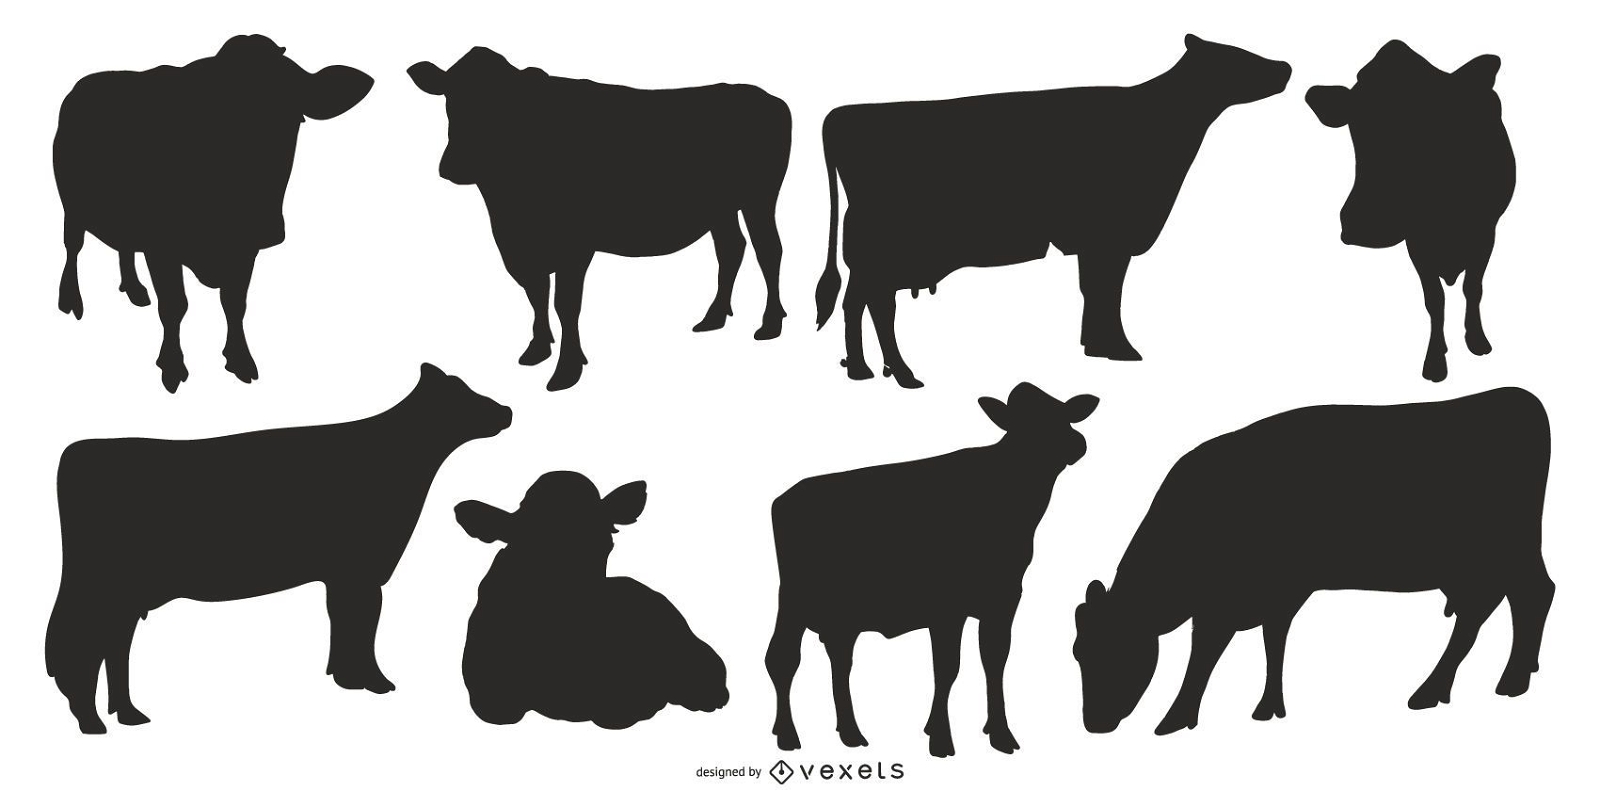 Cow silhouettes collection